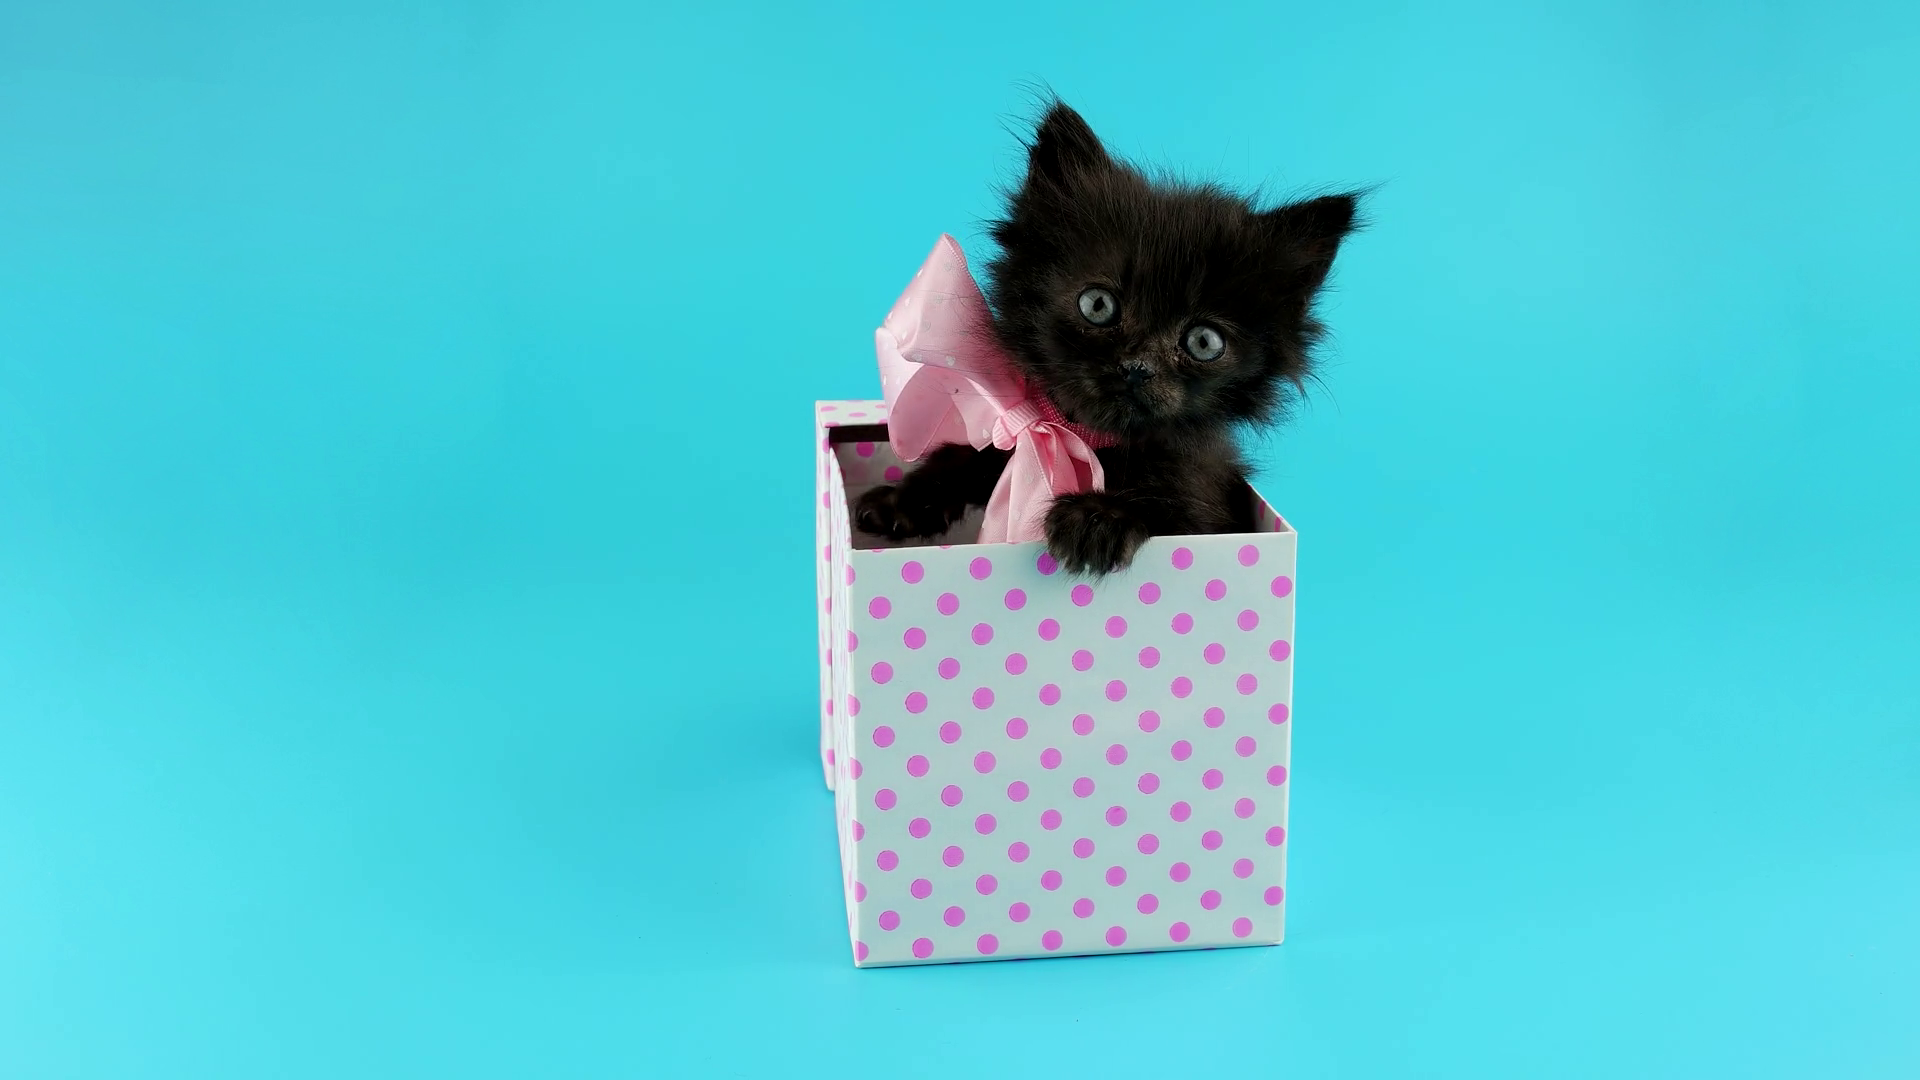 Funny black kitten trying to get out from gift box, ready to keying ...